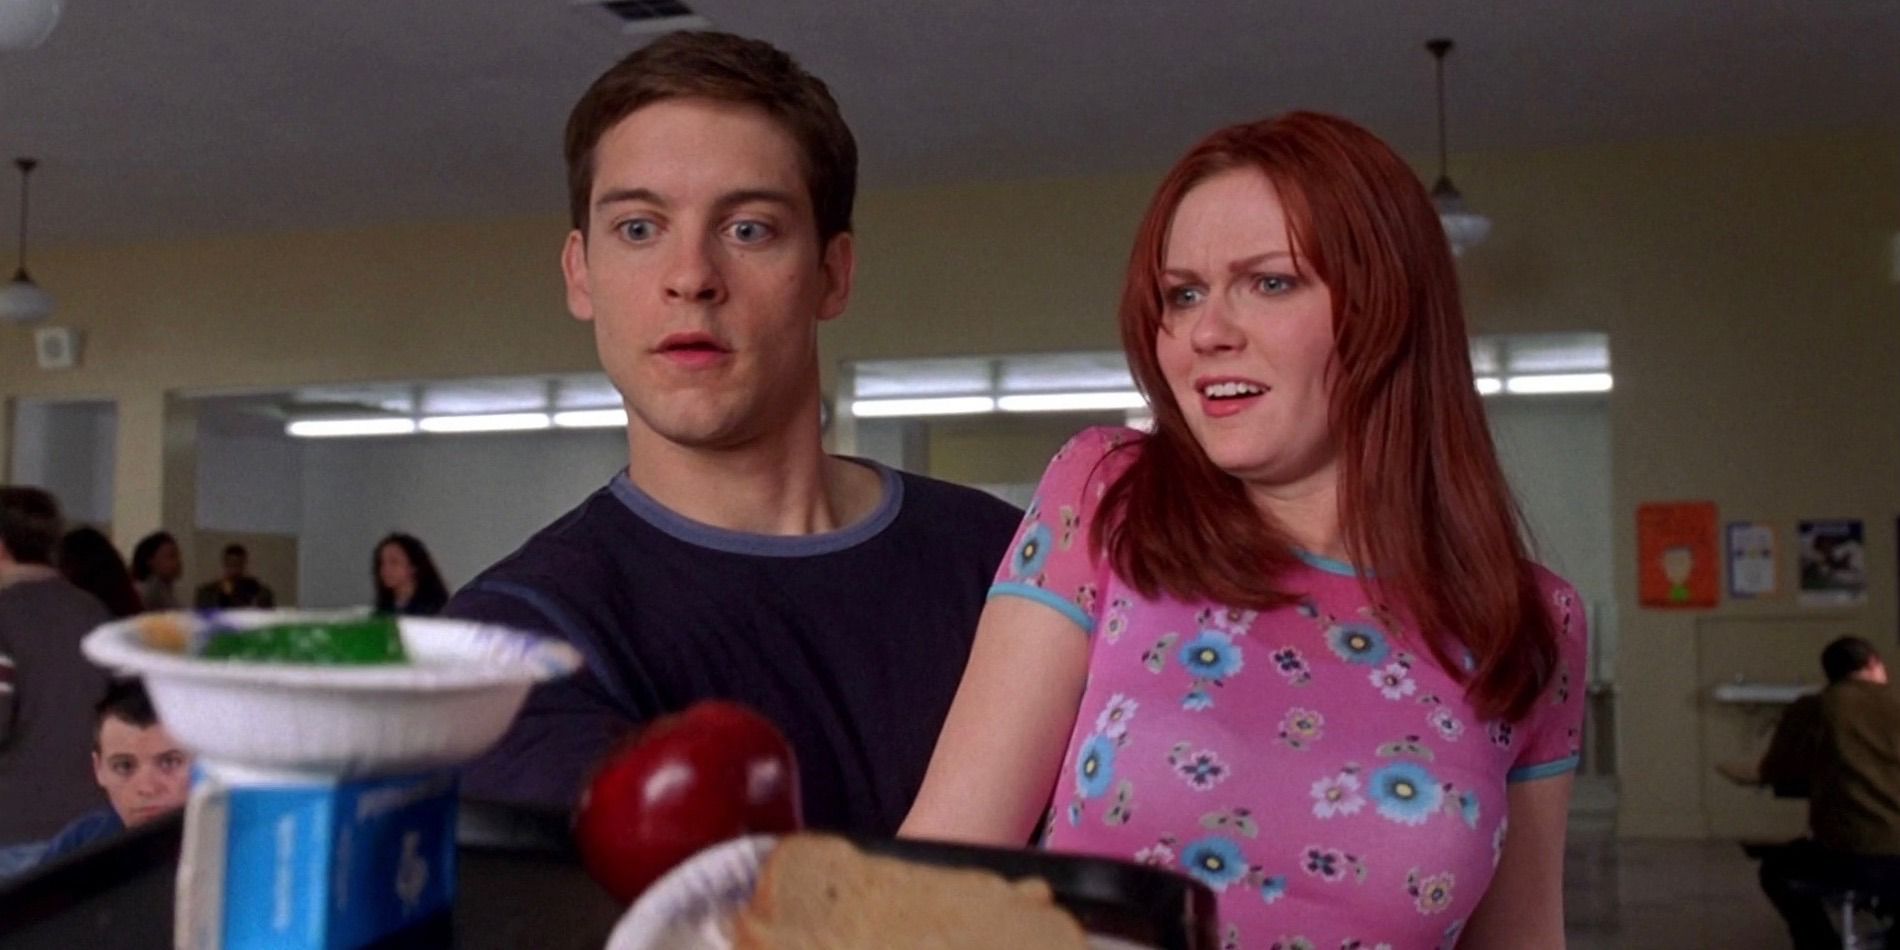 Tobey Maguire as Peter Parker and Kirsten Dunst as Mary Jane Watson in Spider-Man 2002